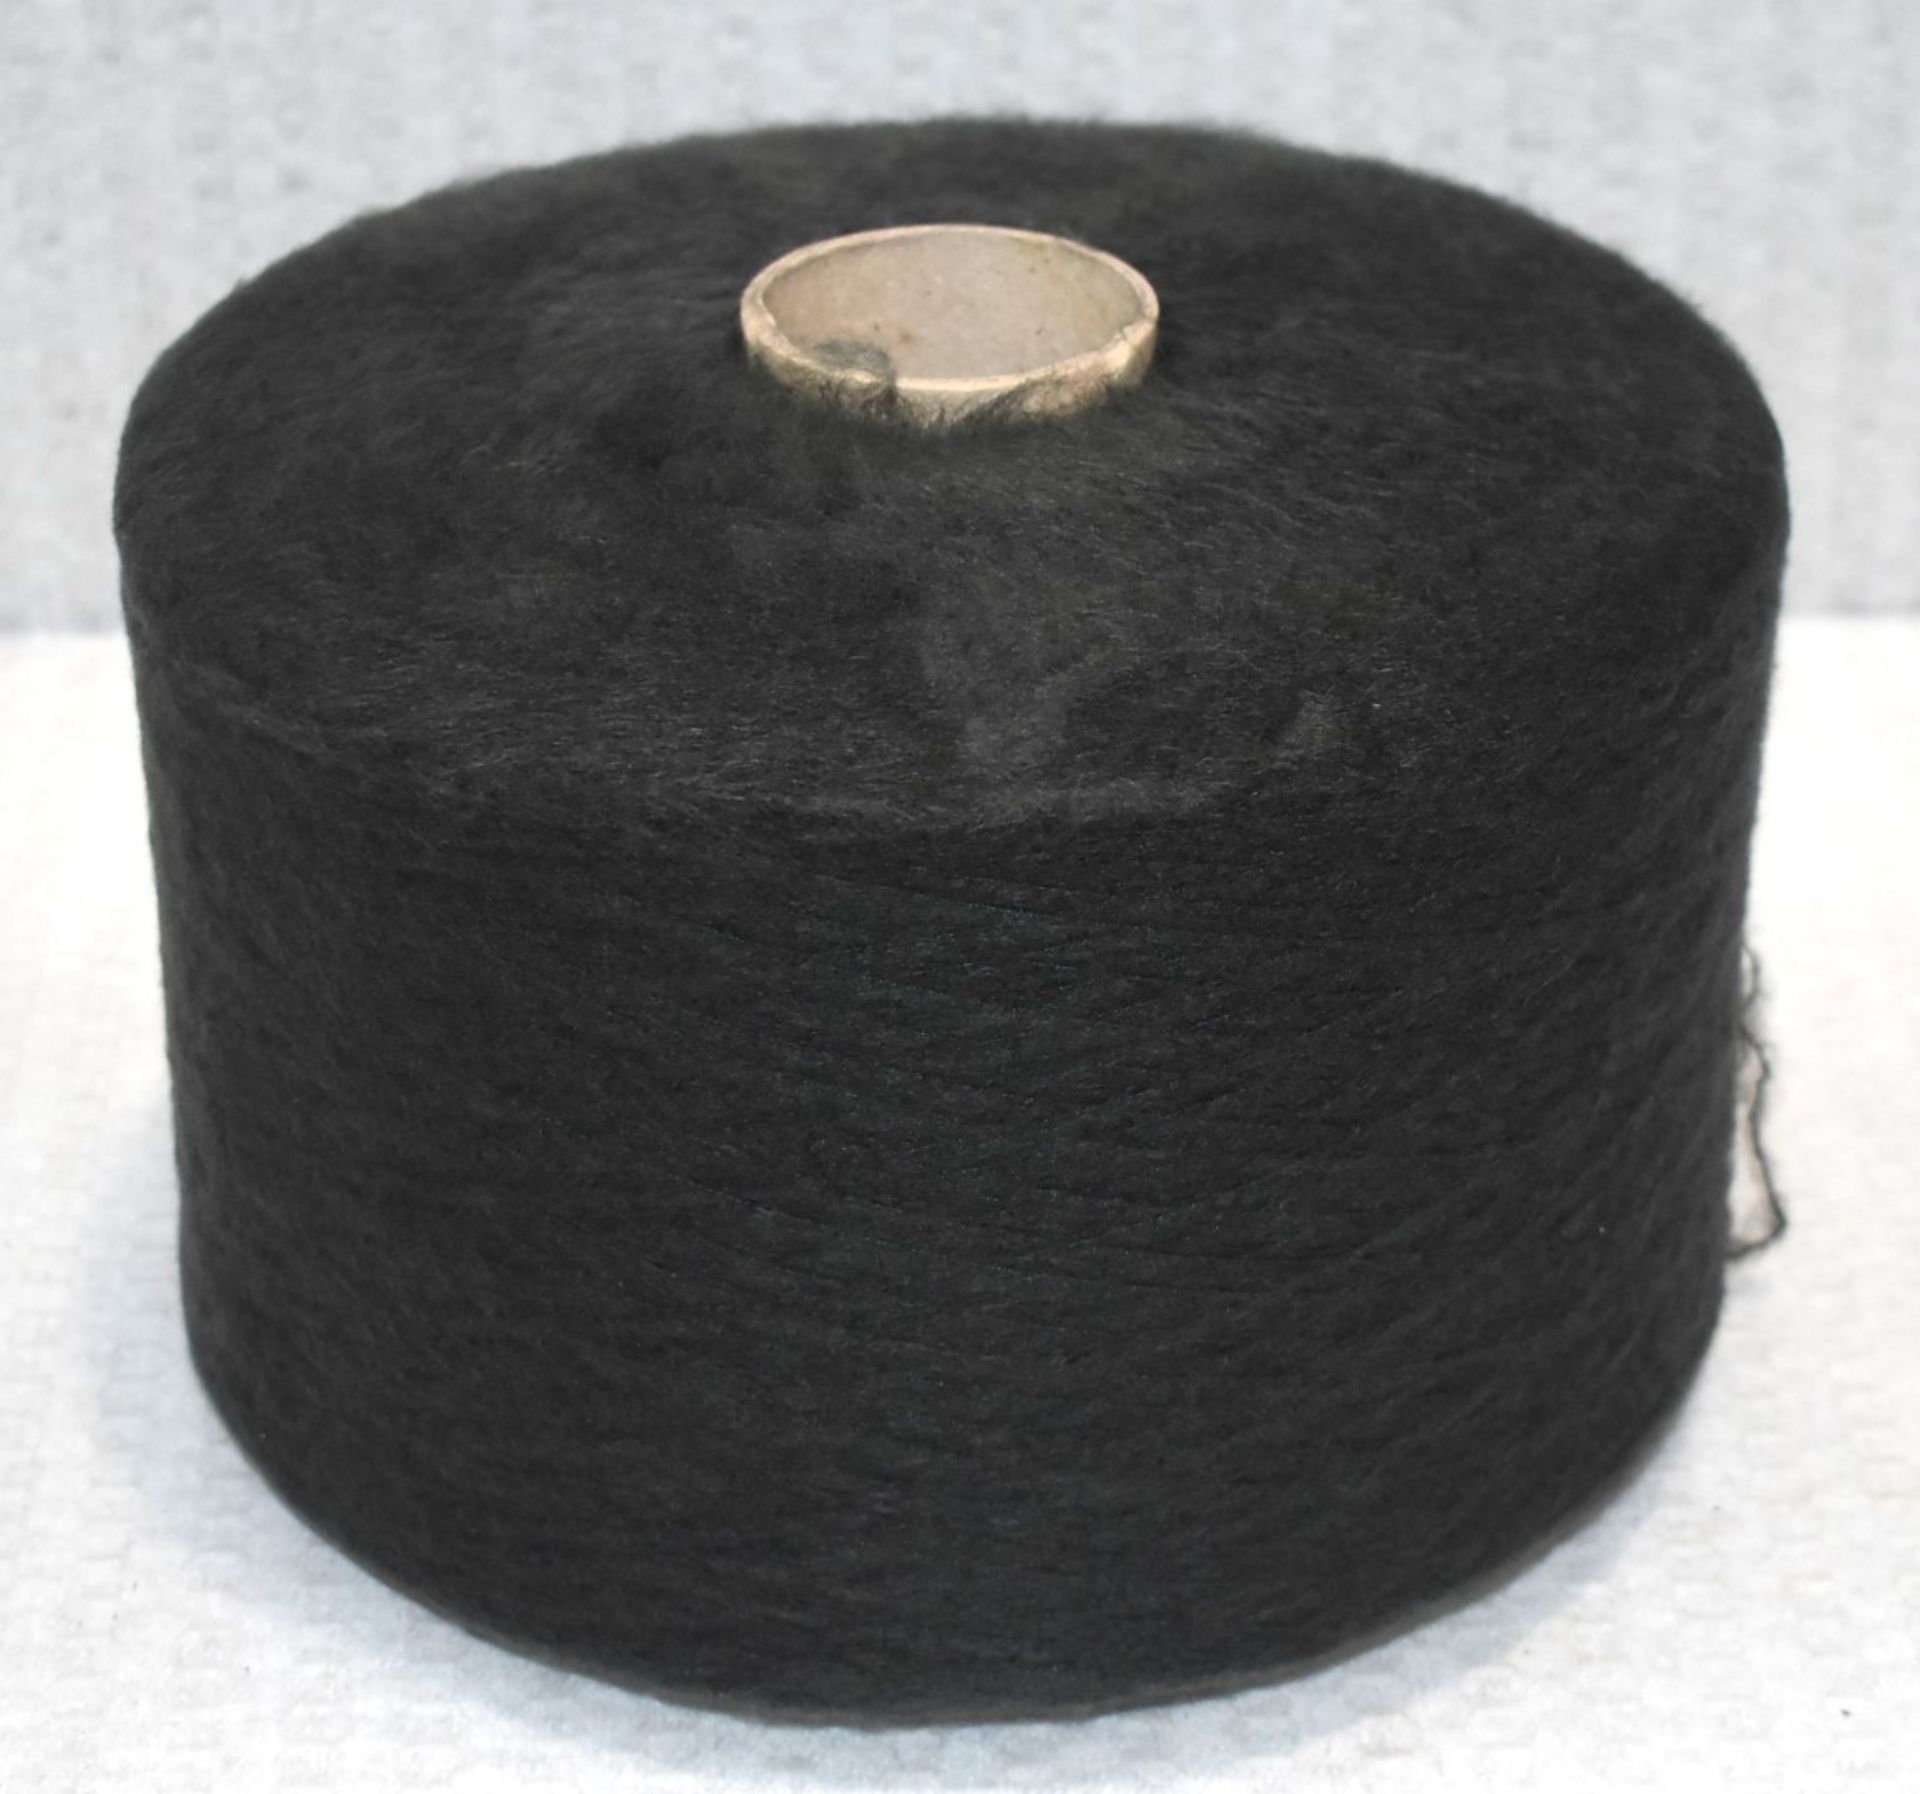 12 x Cones of 1/7,5 Lagona Knitting Yarn - Charcoal - Approx Weight: 2,300g - New Stock ABL Yarn - Image 2 of 11